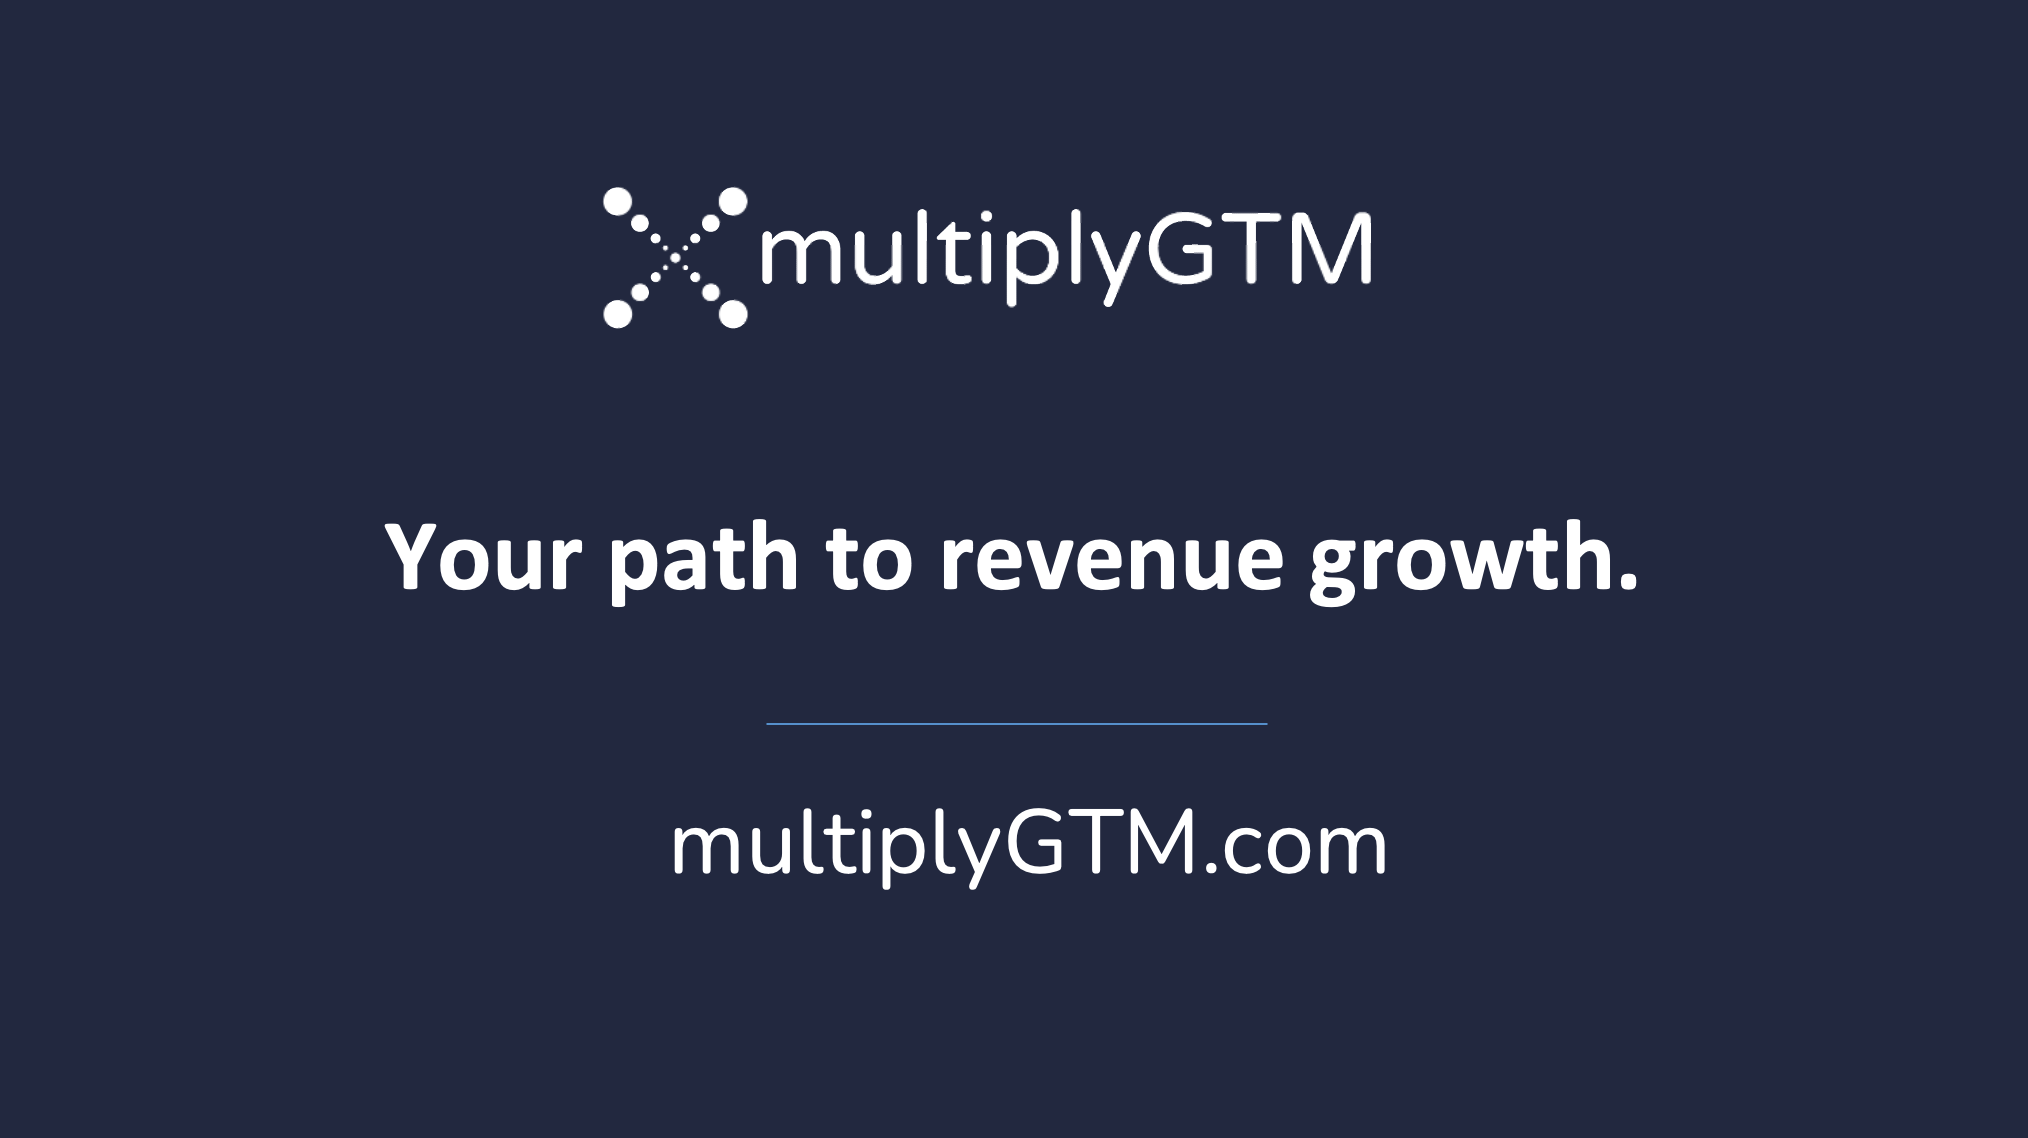 MultiplyGTM Overview